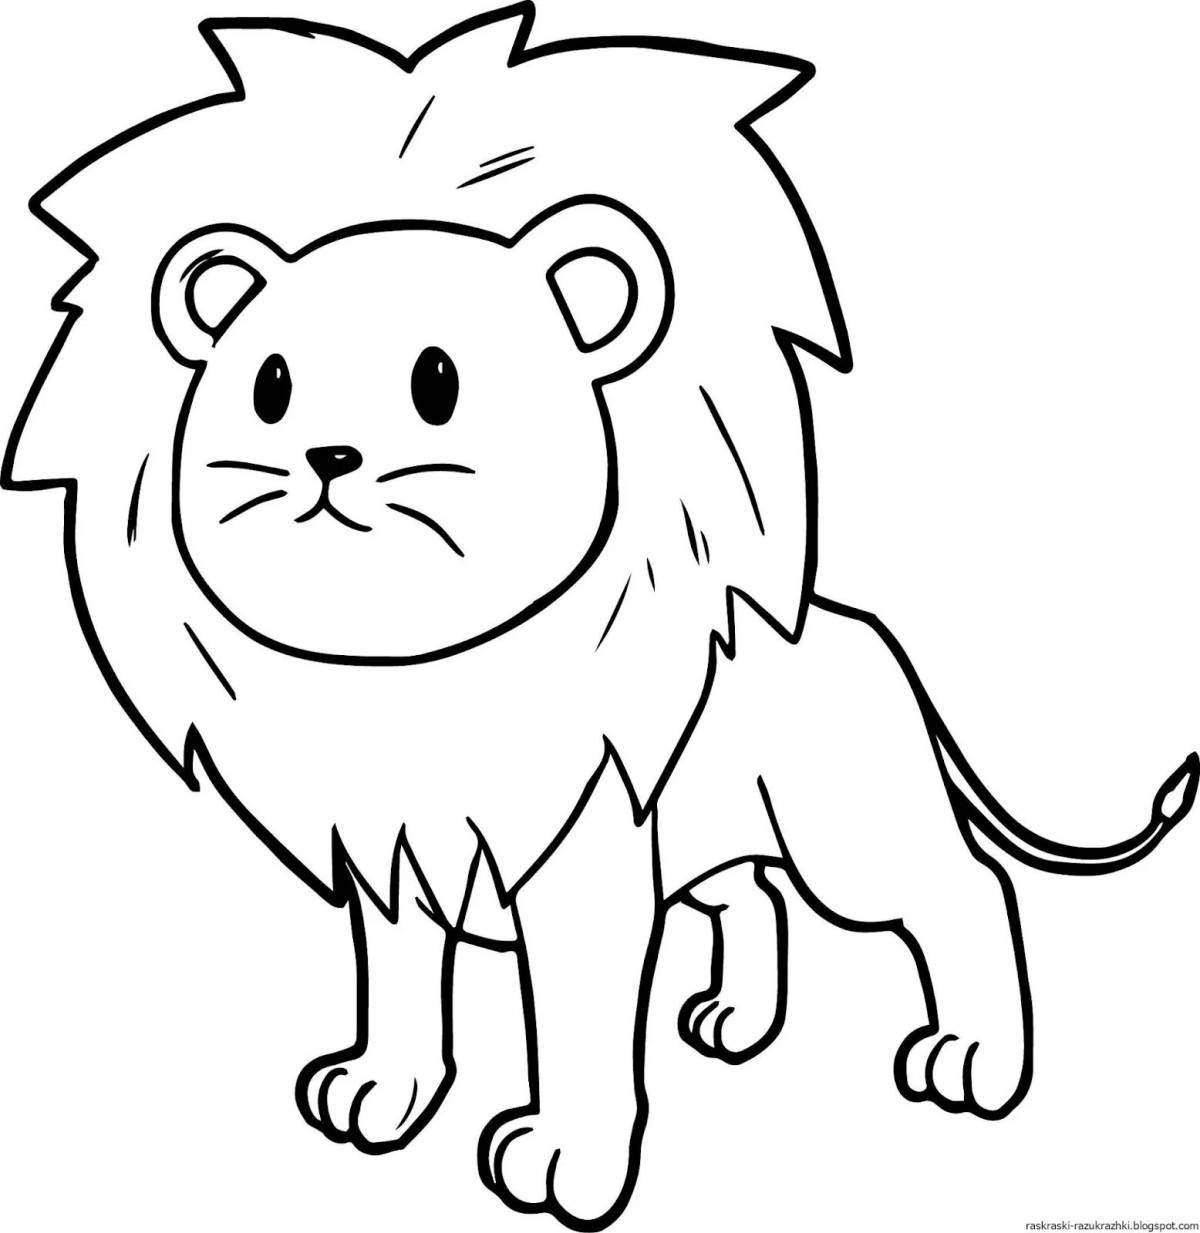 Exquisite lion pattern coloring book